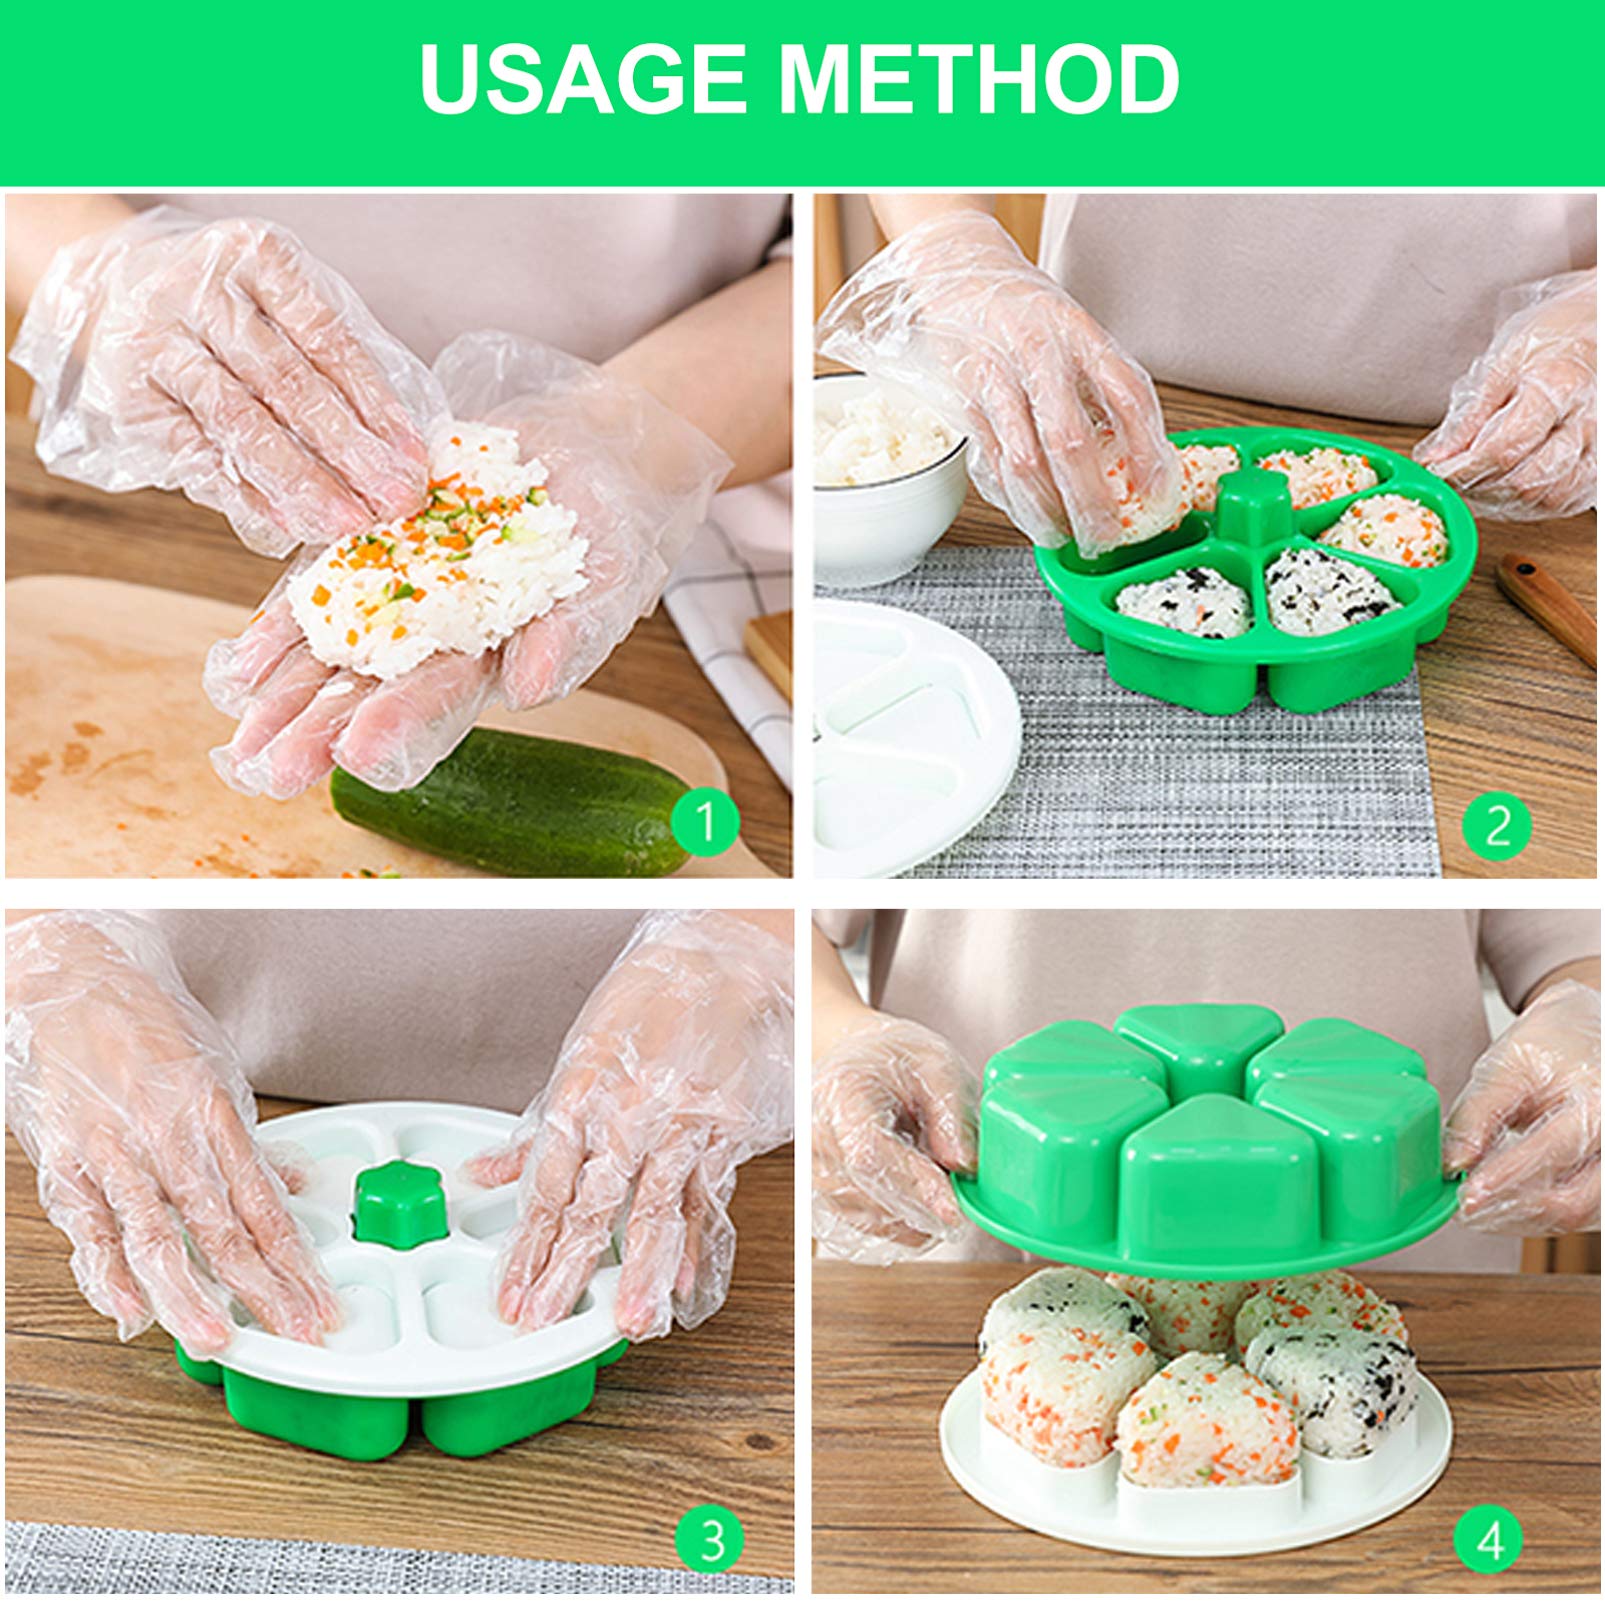 Hemoton 6 in 1 Rice Ball Mold Triangle Musubi Maker DIY Sushi Bento Nori Kitchen Rice Mould Nori Seaweed Punch Cutter for Home Party Kids Meal